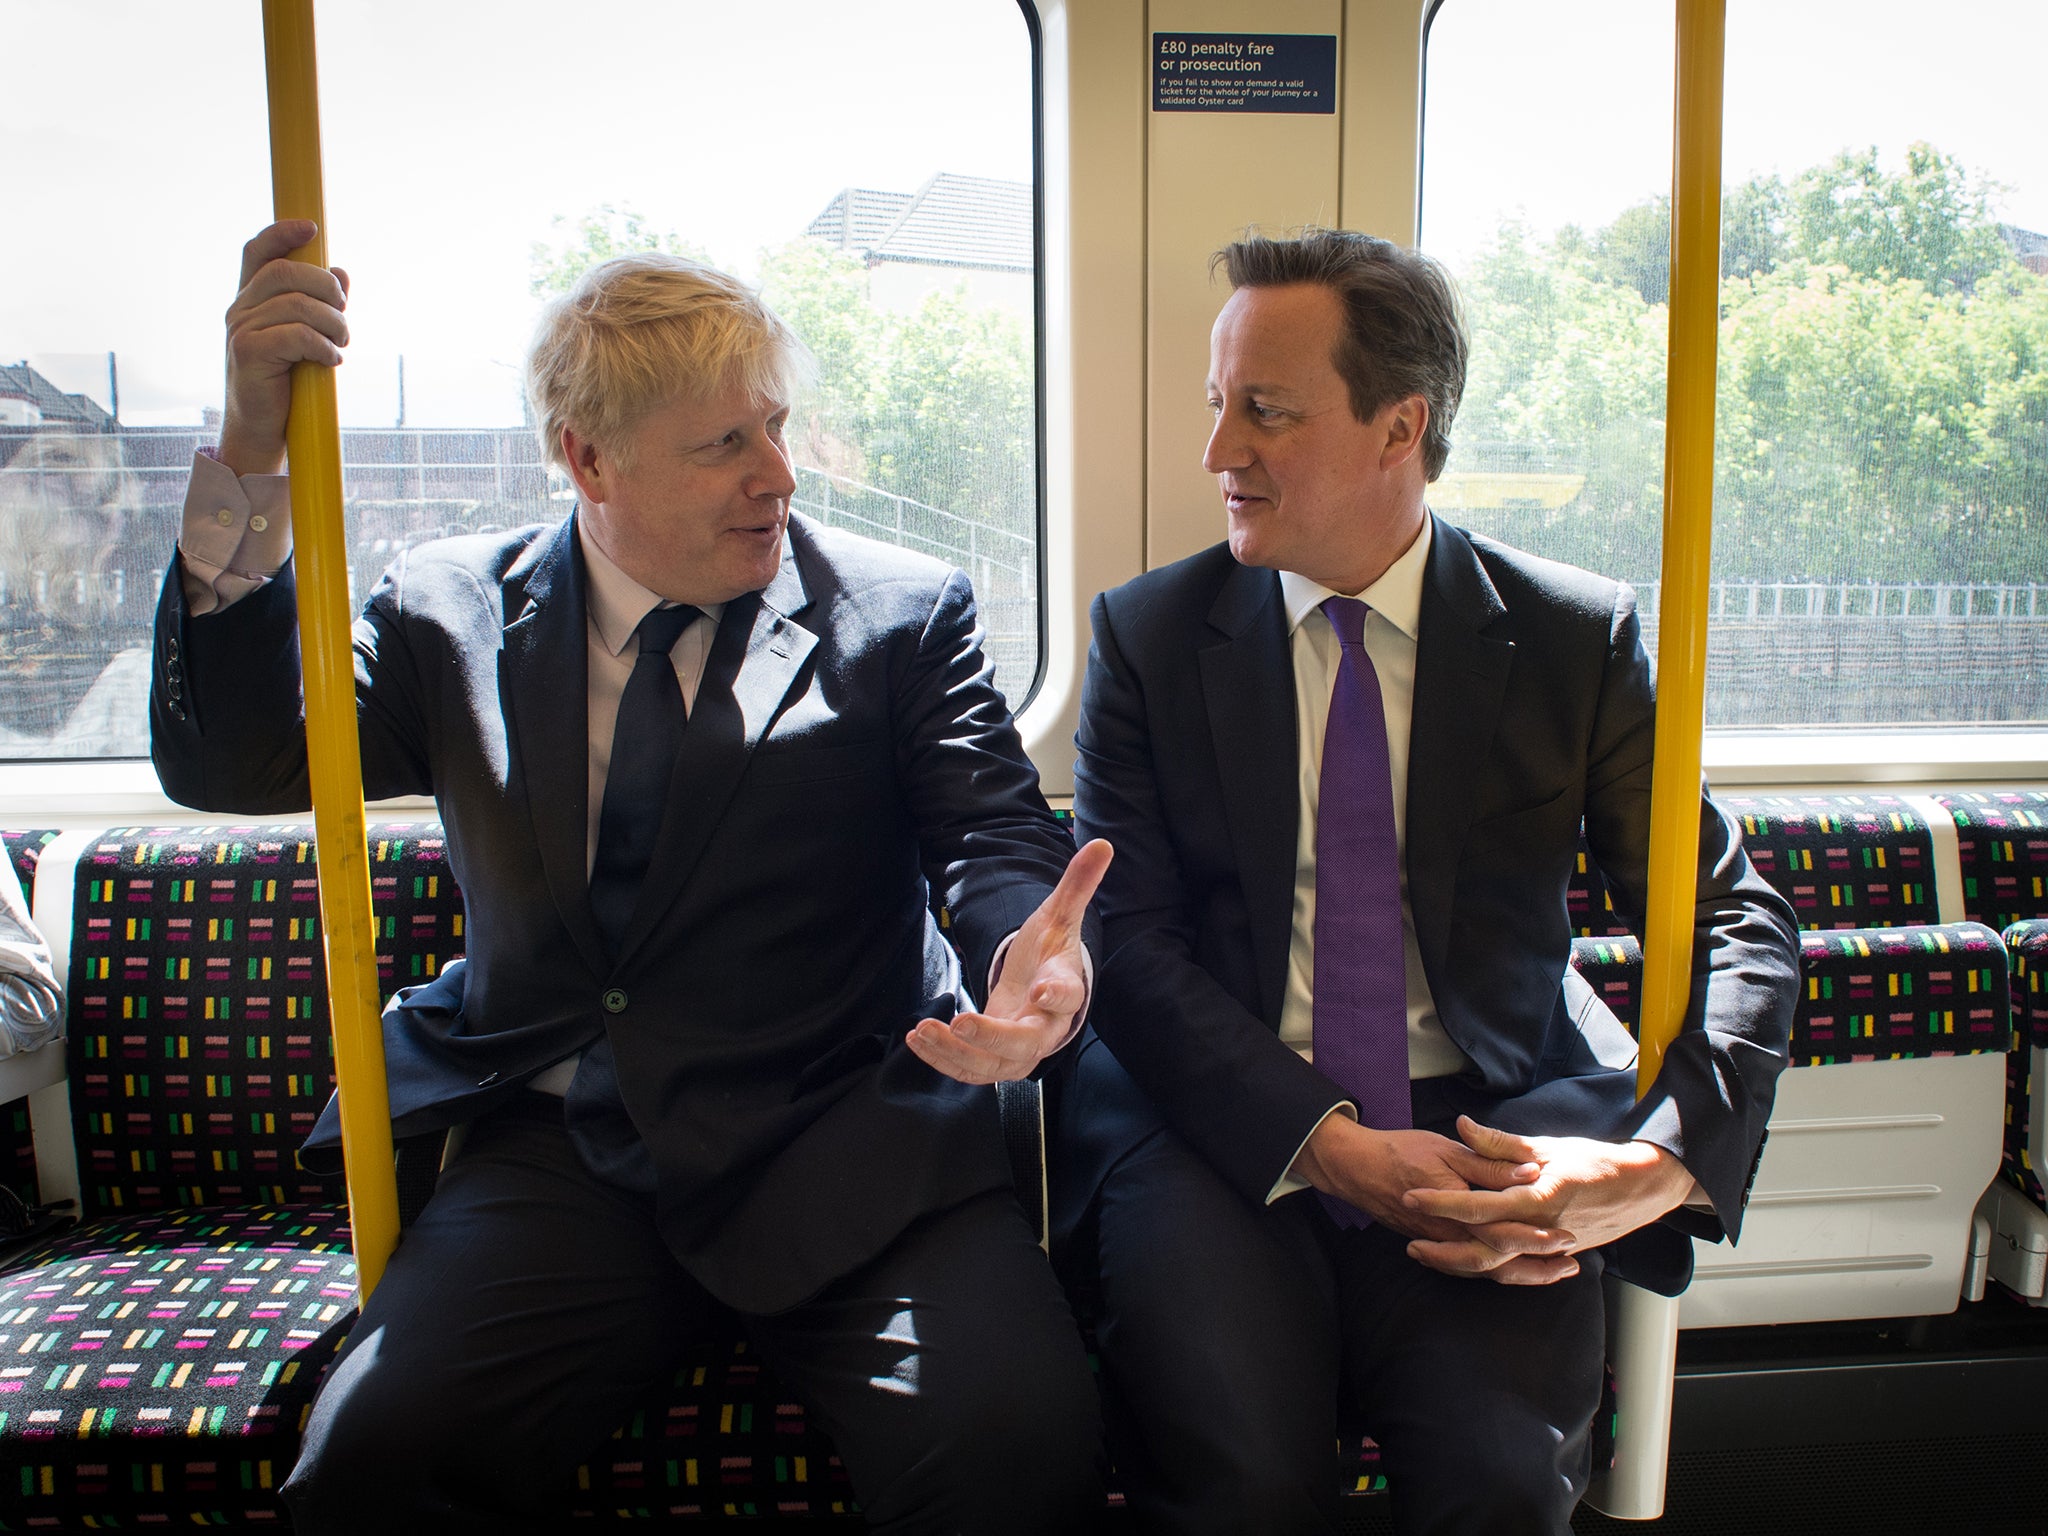 The PM's friendship and rivalry with Mr Johnson stretches back to their days at Eton and Oxford